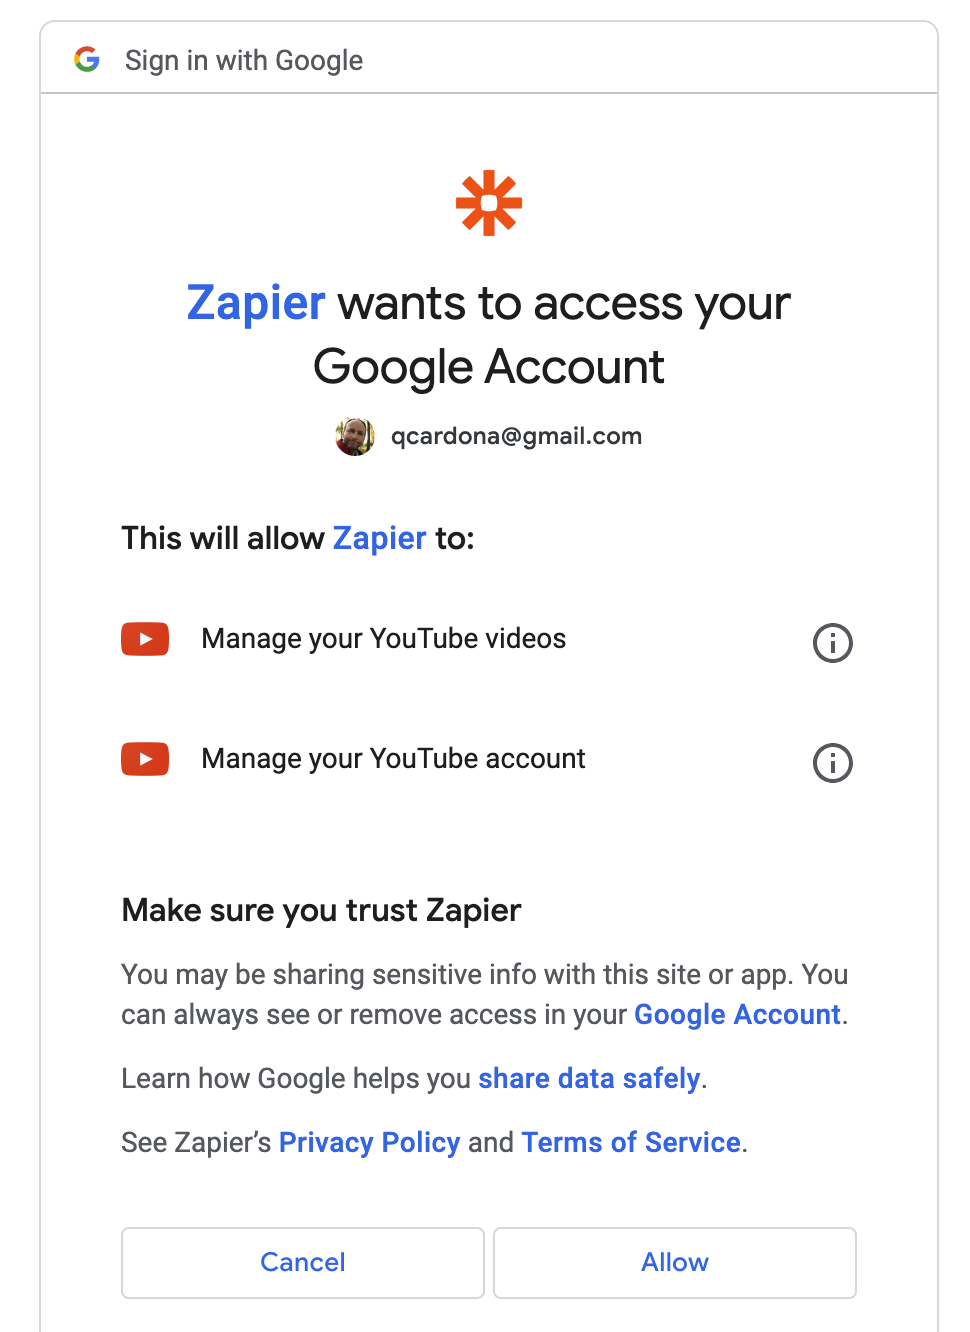 Zapier wants to access your Google account